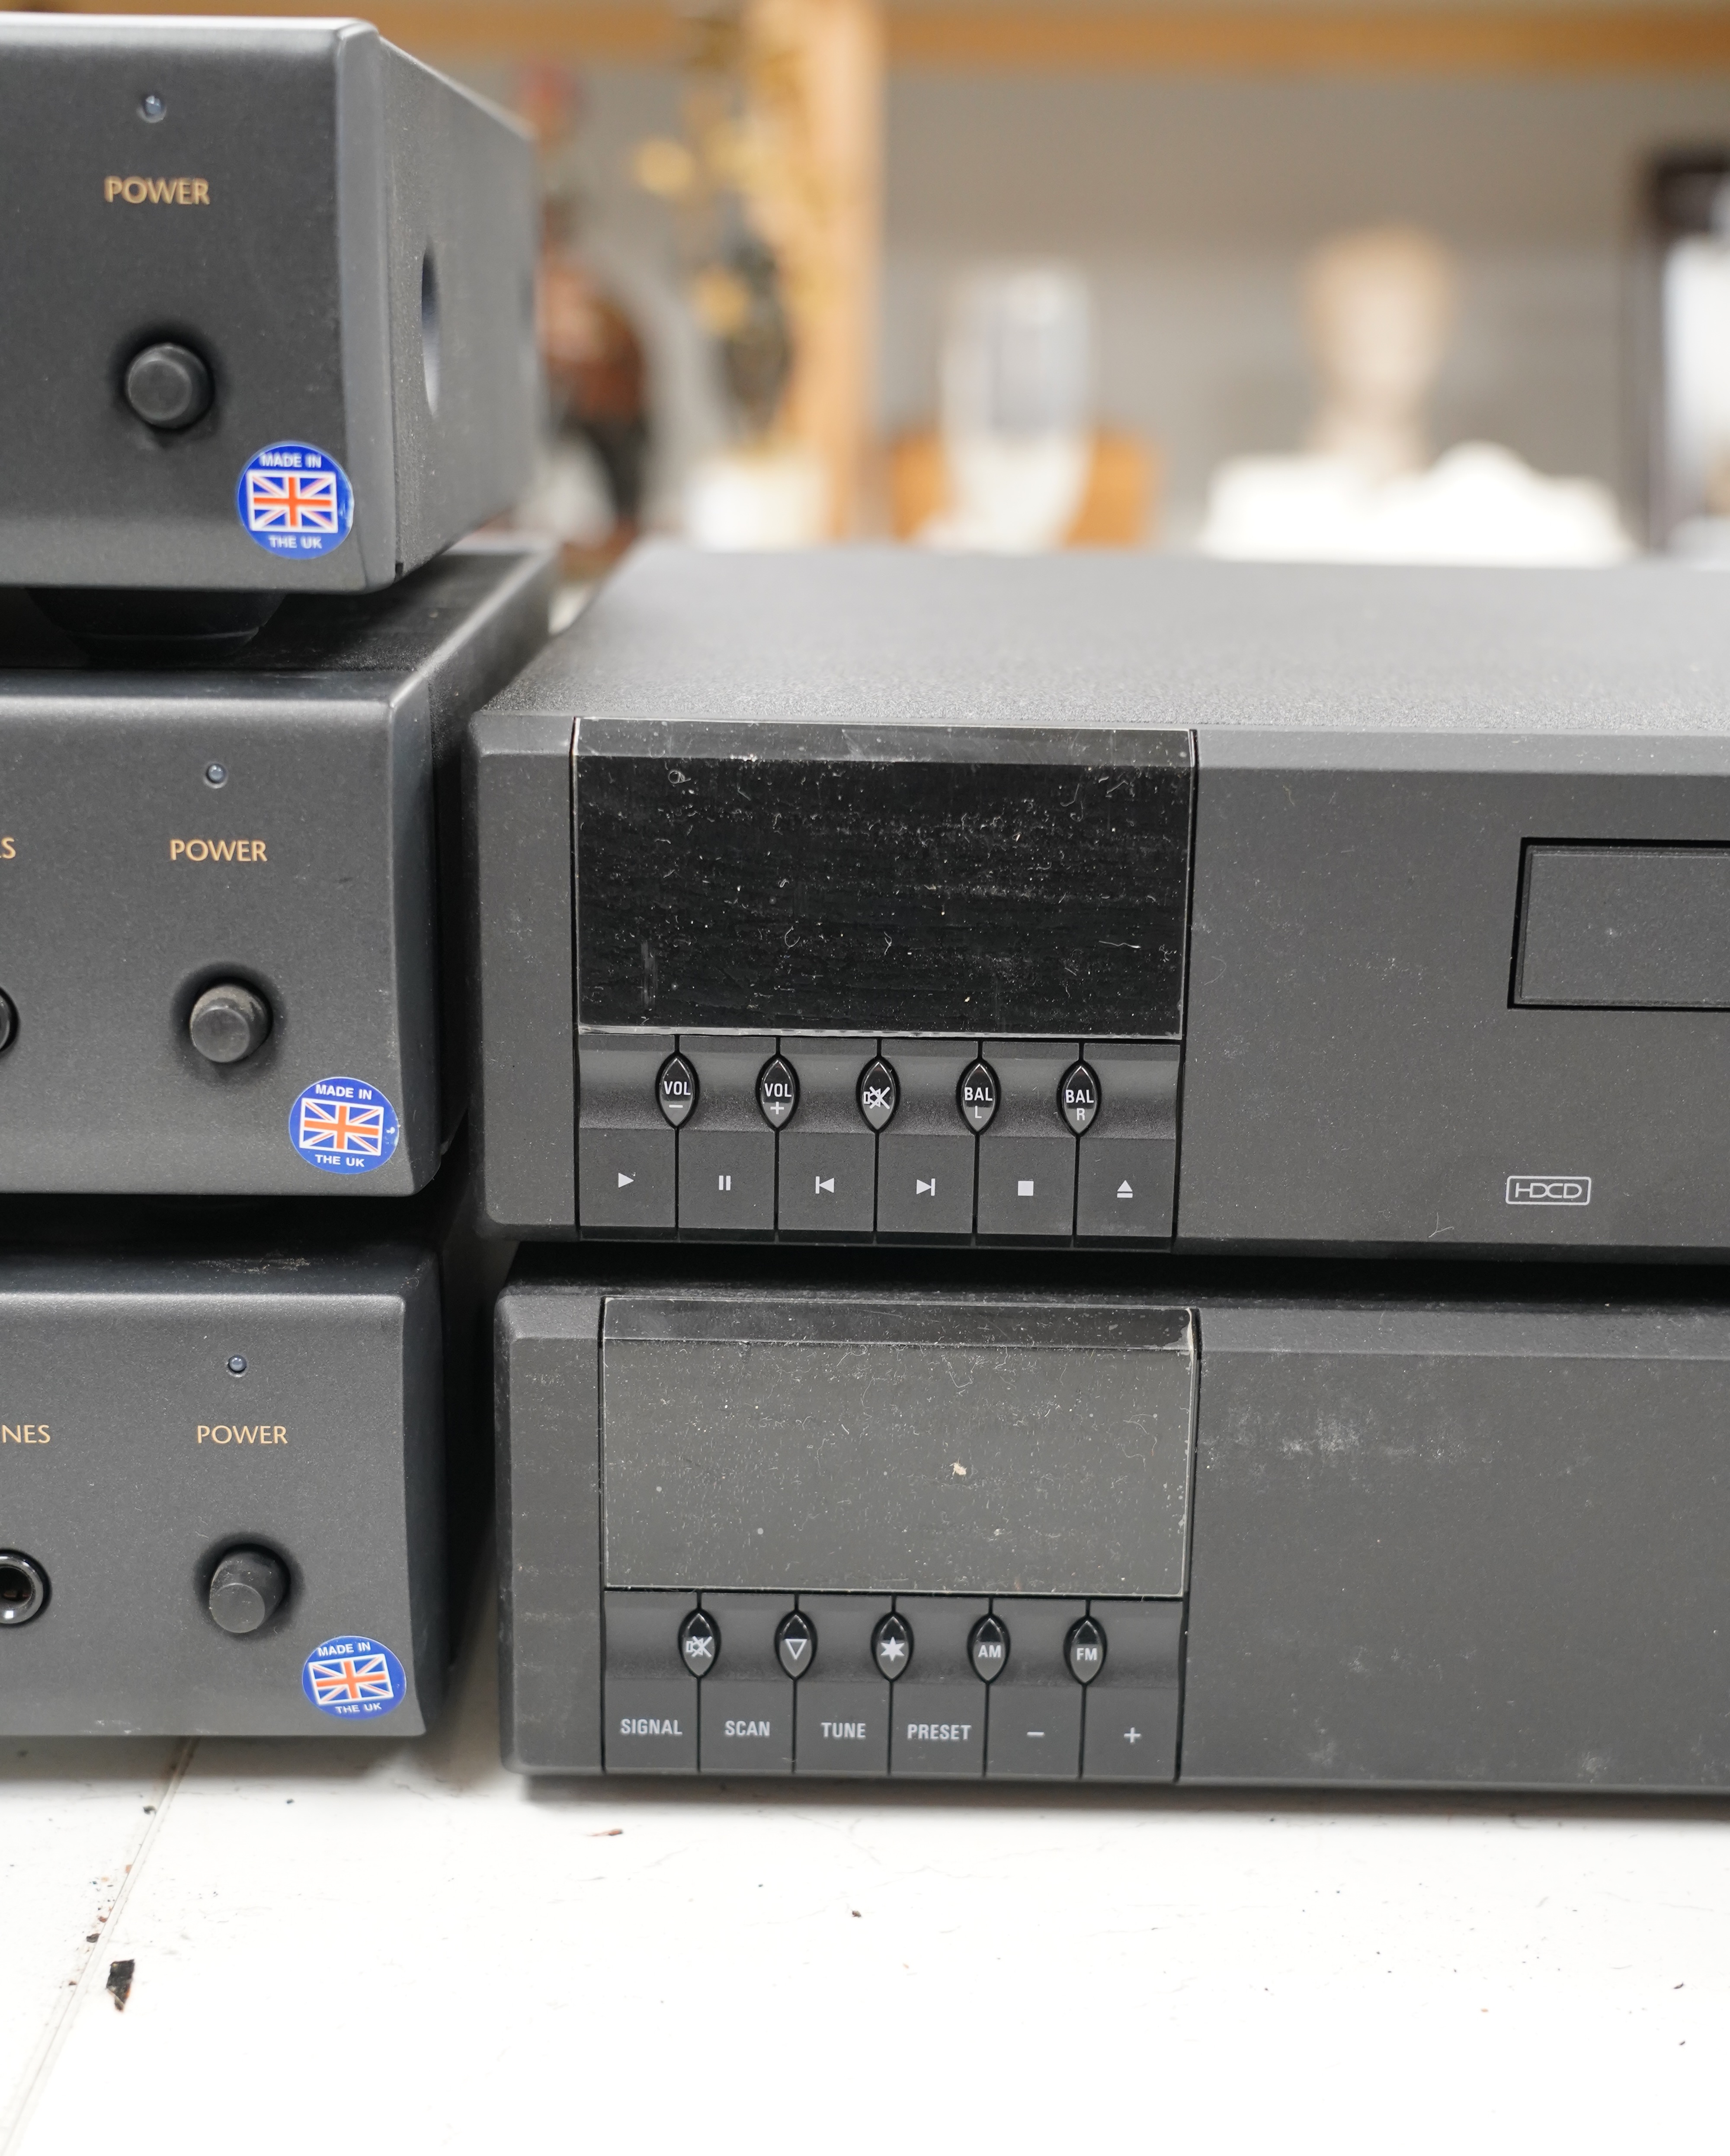 A Linn Pekin tuner, a Linn Genki CD player and three Arcam Alpha 8 Power Amps, with three remote controls, two power cables and instructions for the amplifiers